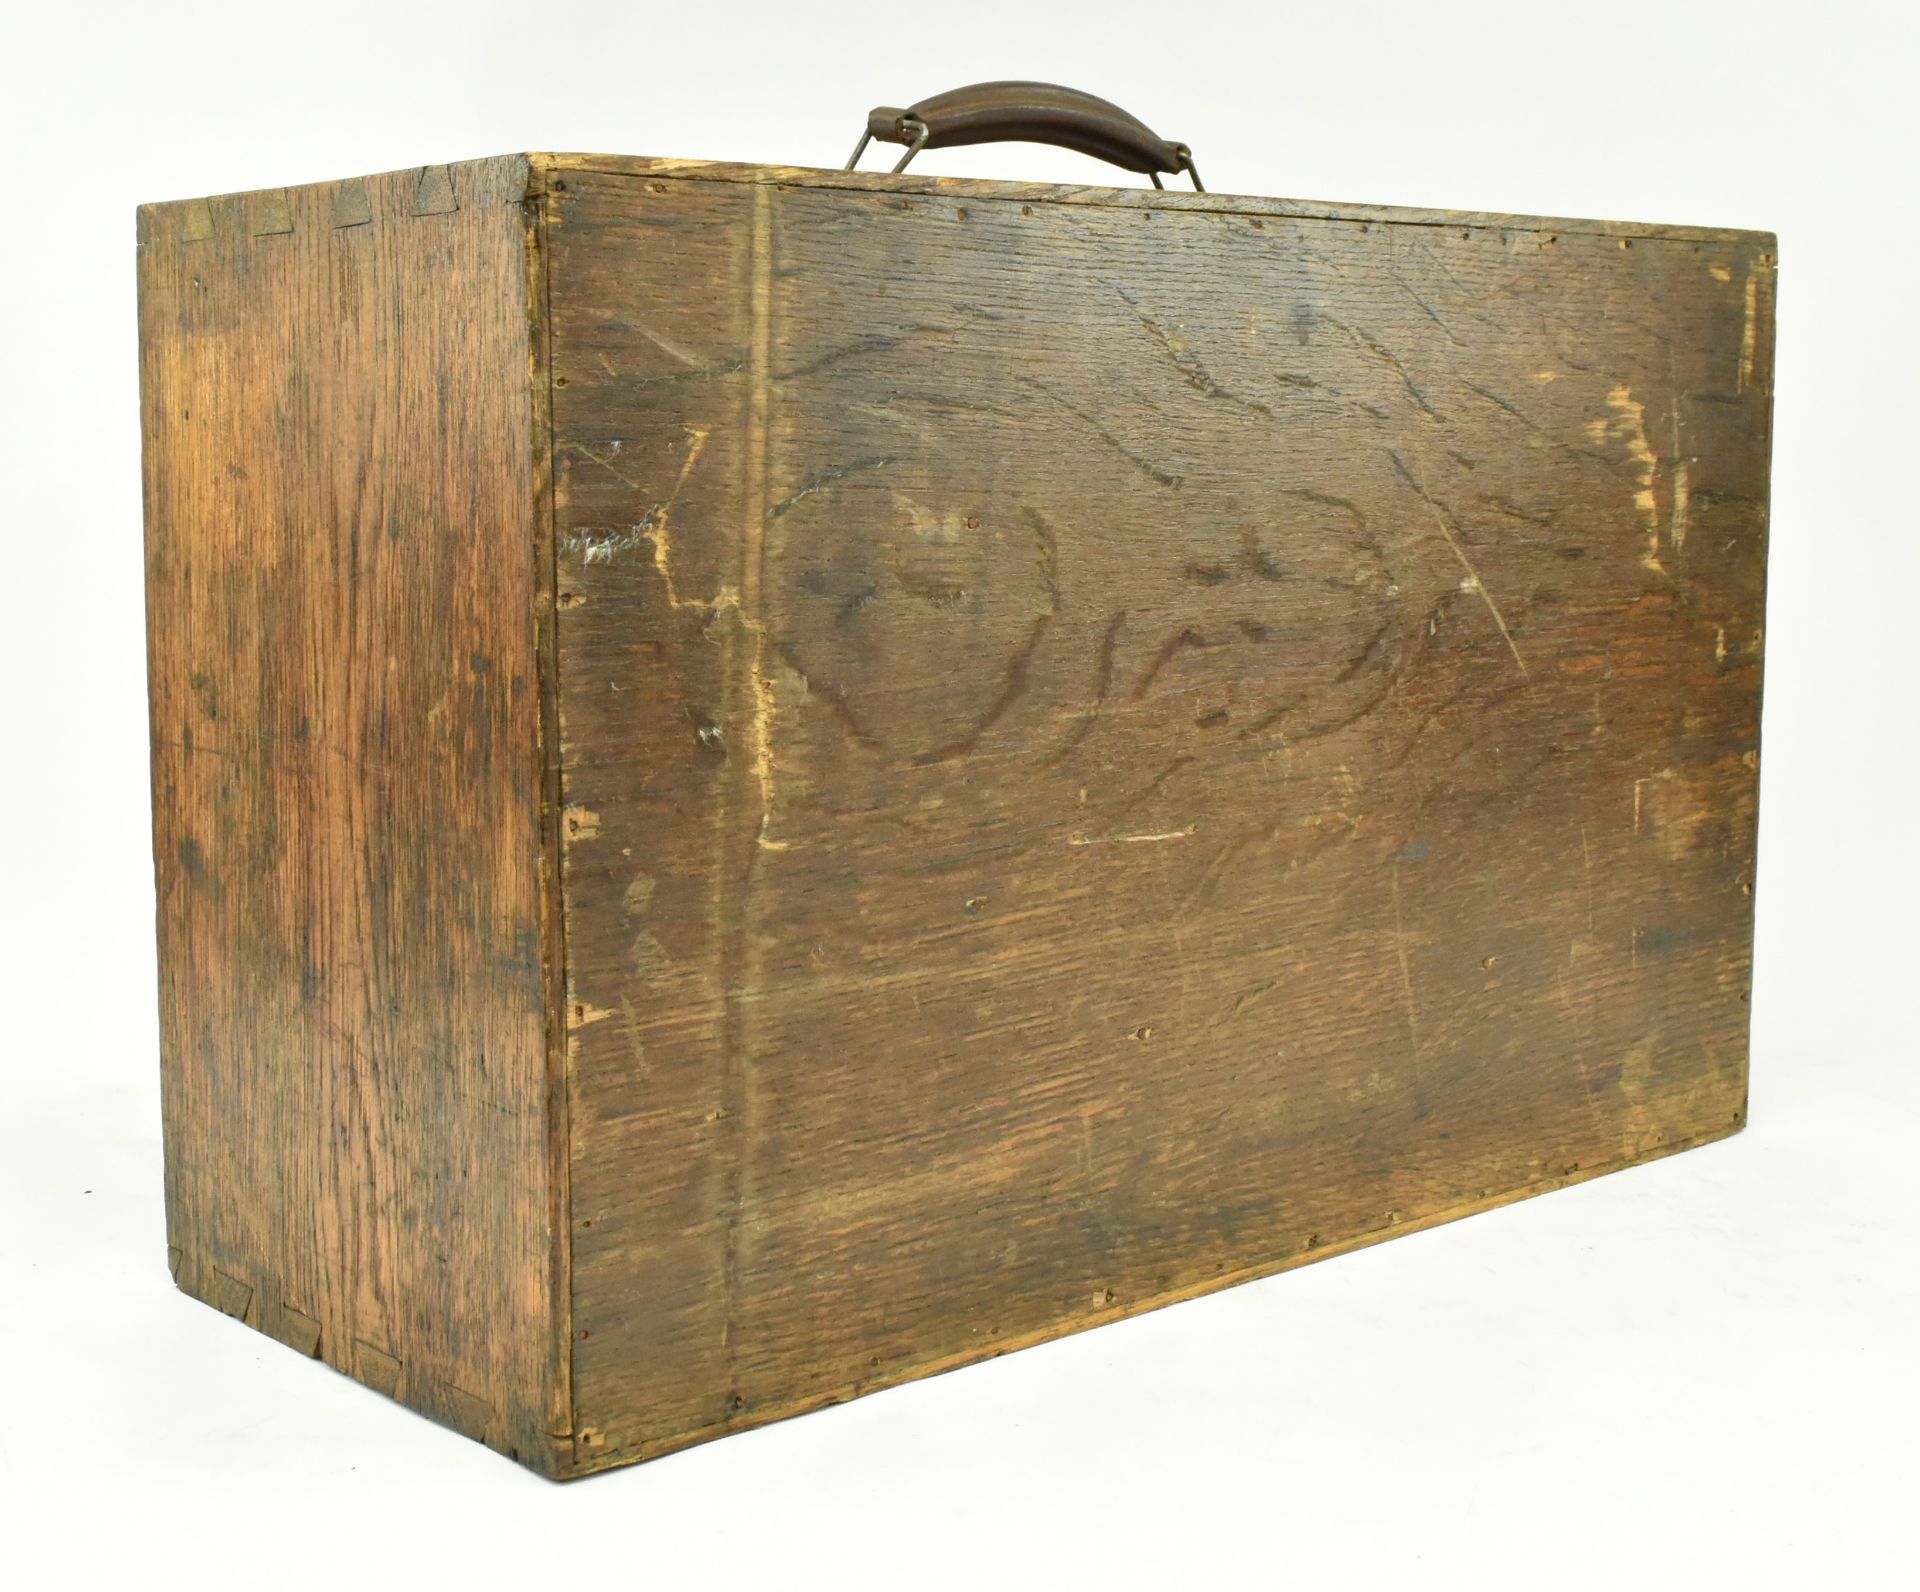 20TH CENTURY OAK CASED ENGINEERS WORKMAN'S TOOL CHEST - Image 6 of 6